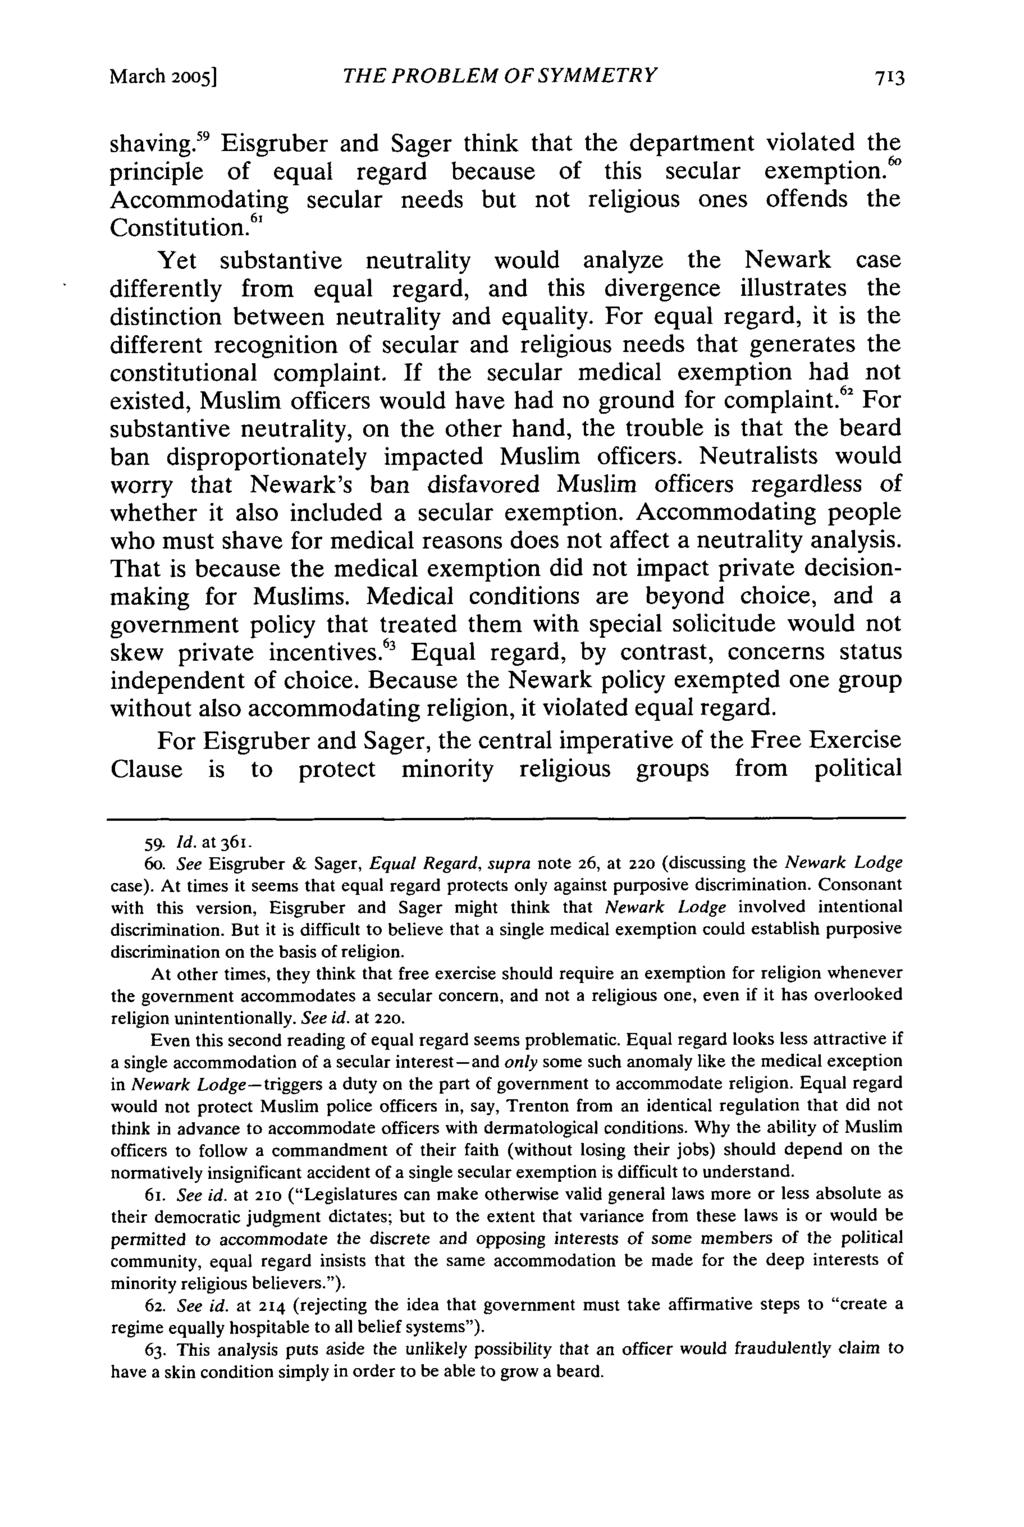 March 2005] THE PROBLEM OF SYMMETRY shaving. 59 Eisgruber and Sager think that the department violated the principle of equal regard because of this secular exemption.